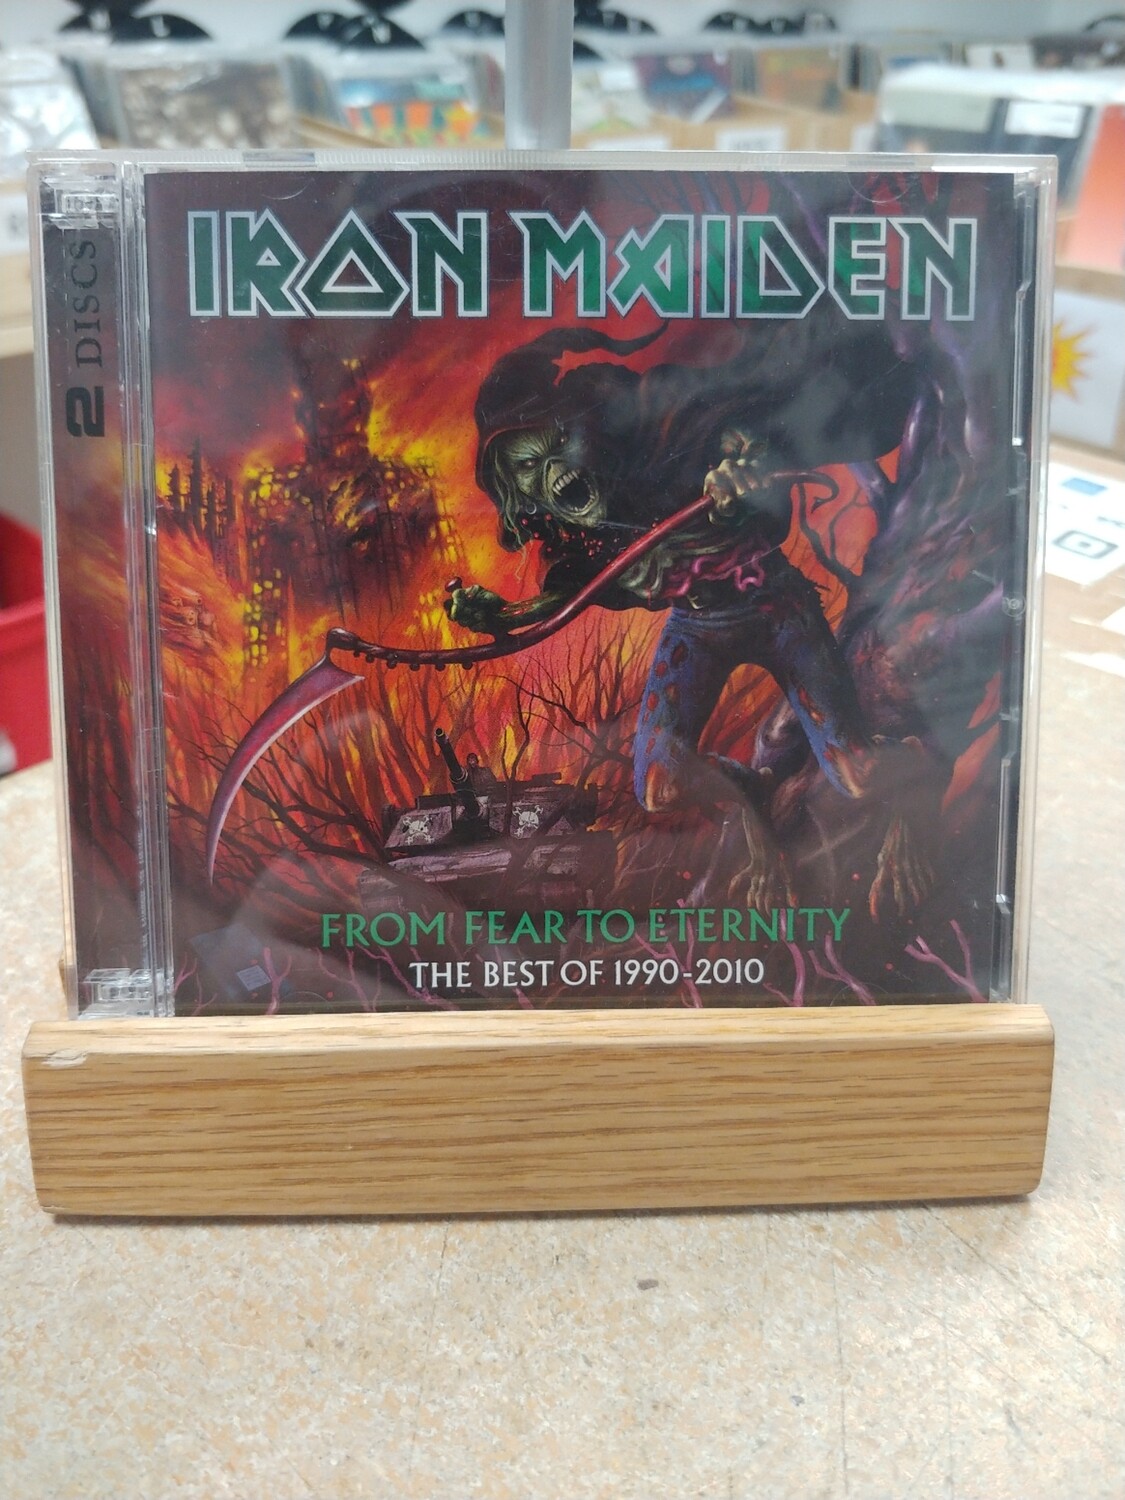 Iron Maiden - From fear to eternity The Best of 1990-2010 (CD)